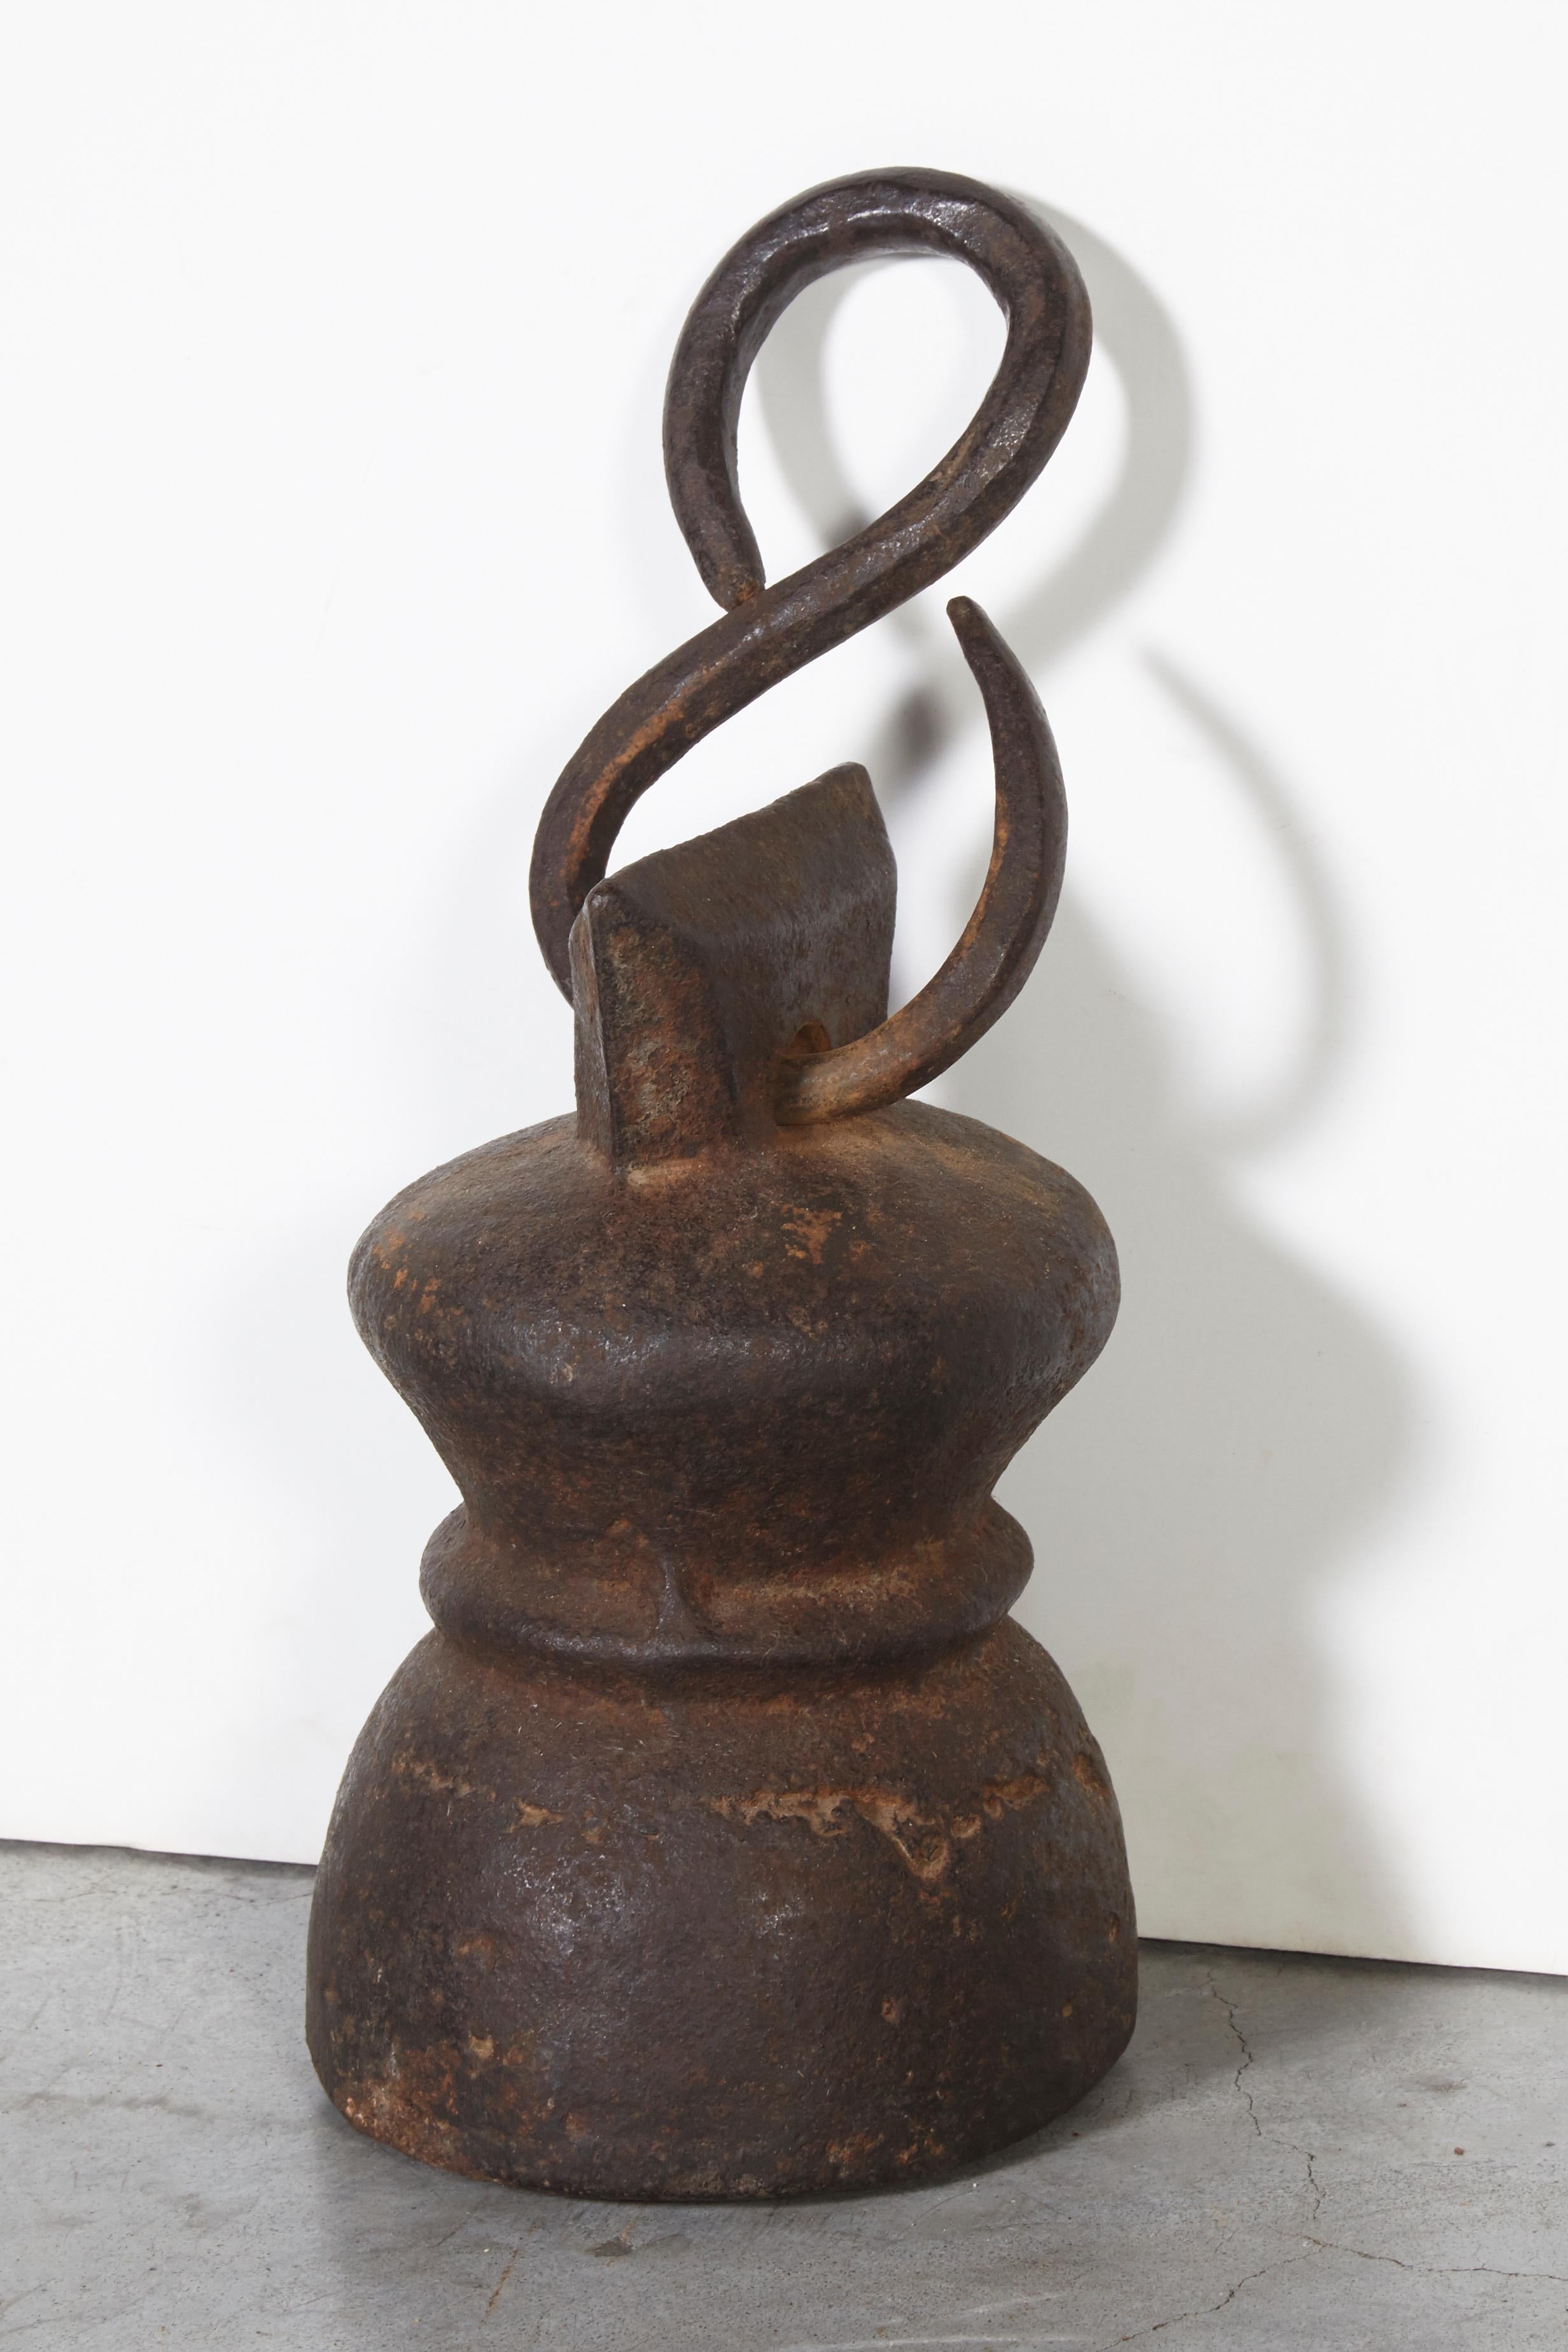 A tall, solid cast iron 19th century Chinese weight. Beautifully worn, with original hand forged hanger. A heavy piece with presence and history.
Measures: Height of piece: 8